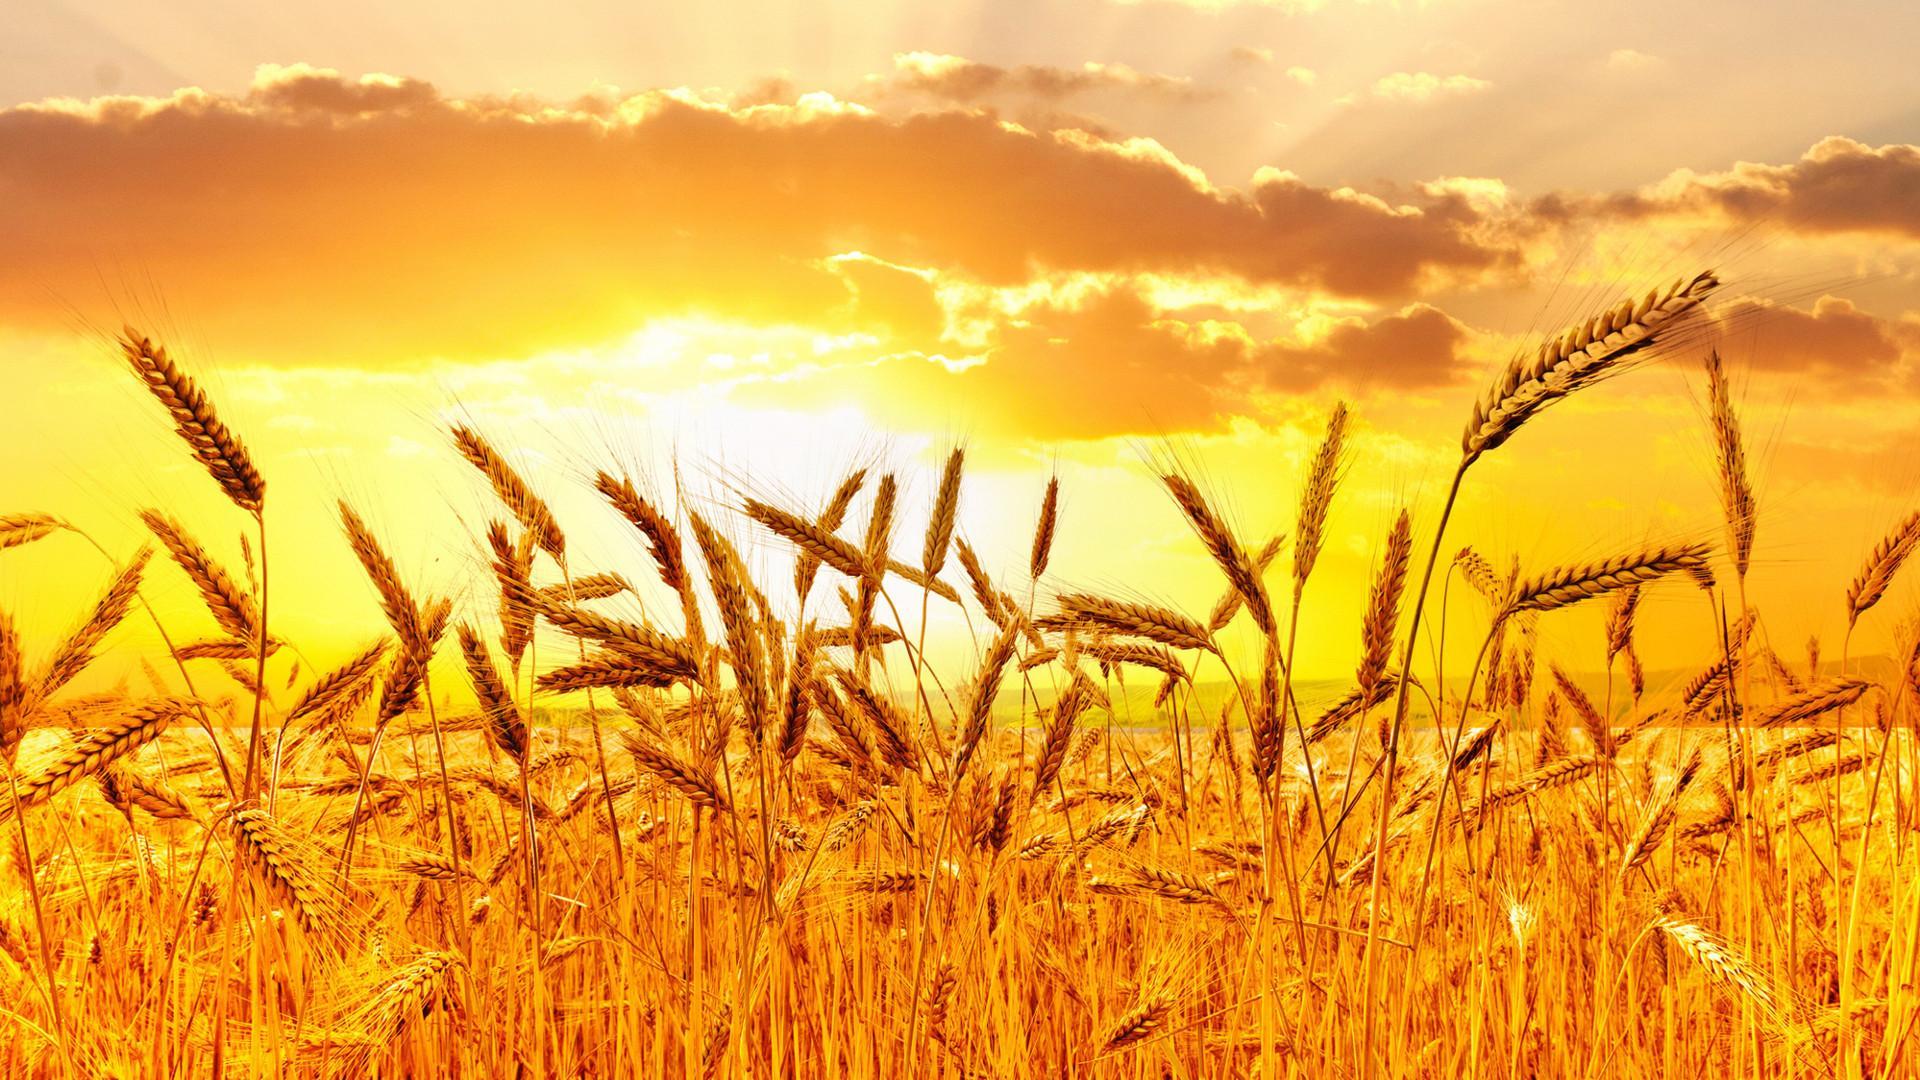 Fields Wheat spikes wallpaper for Android